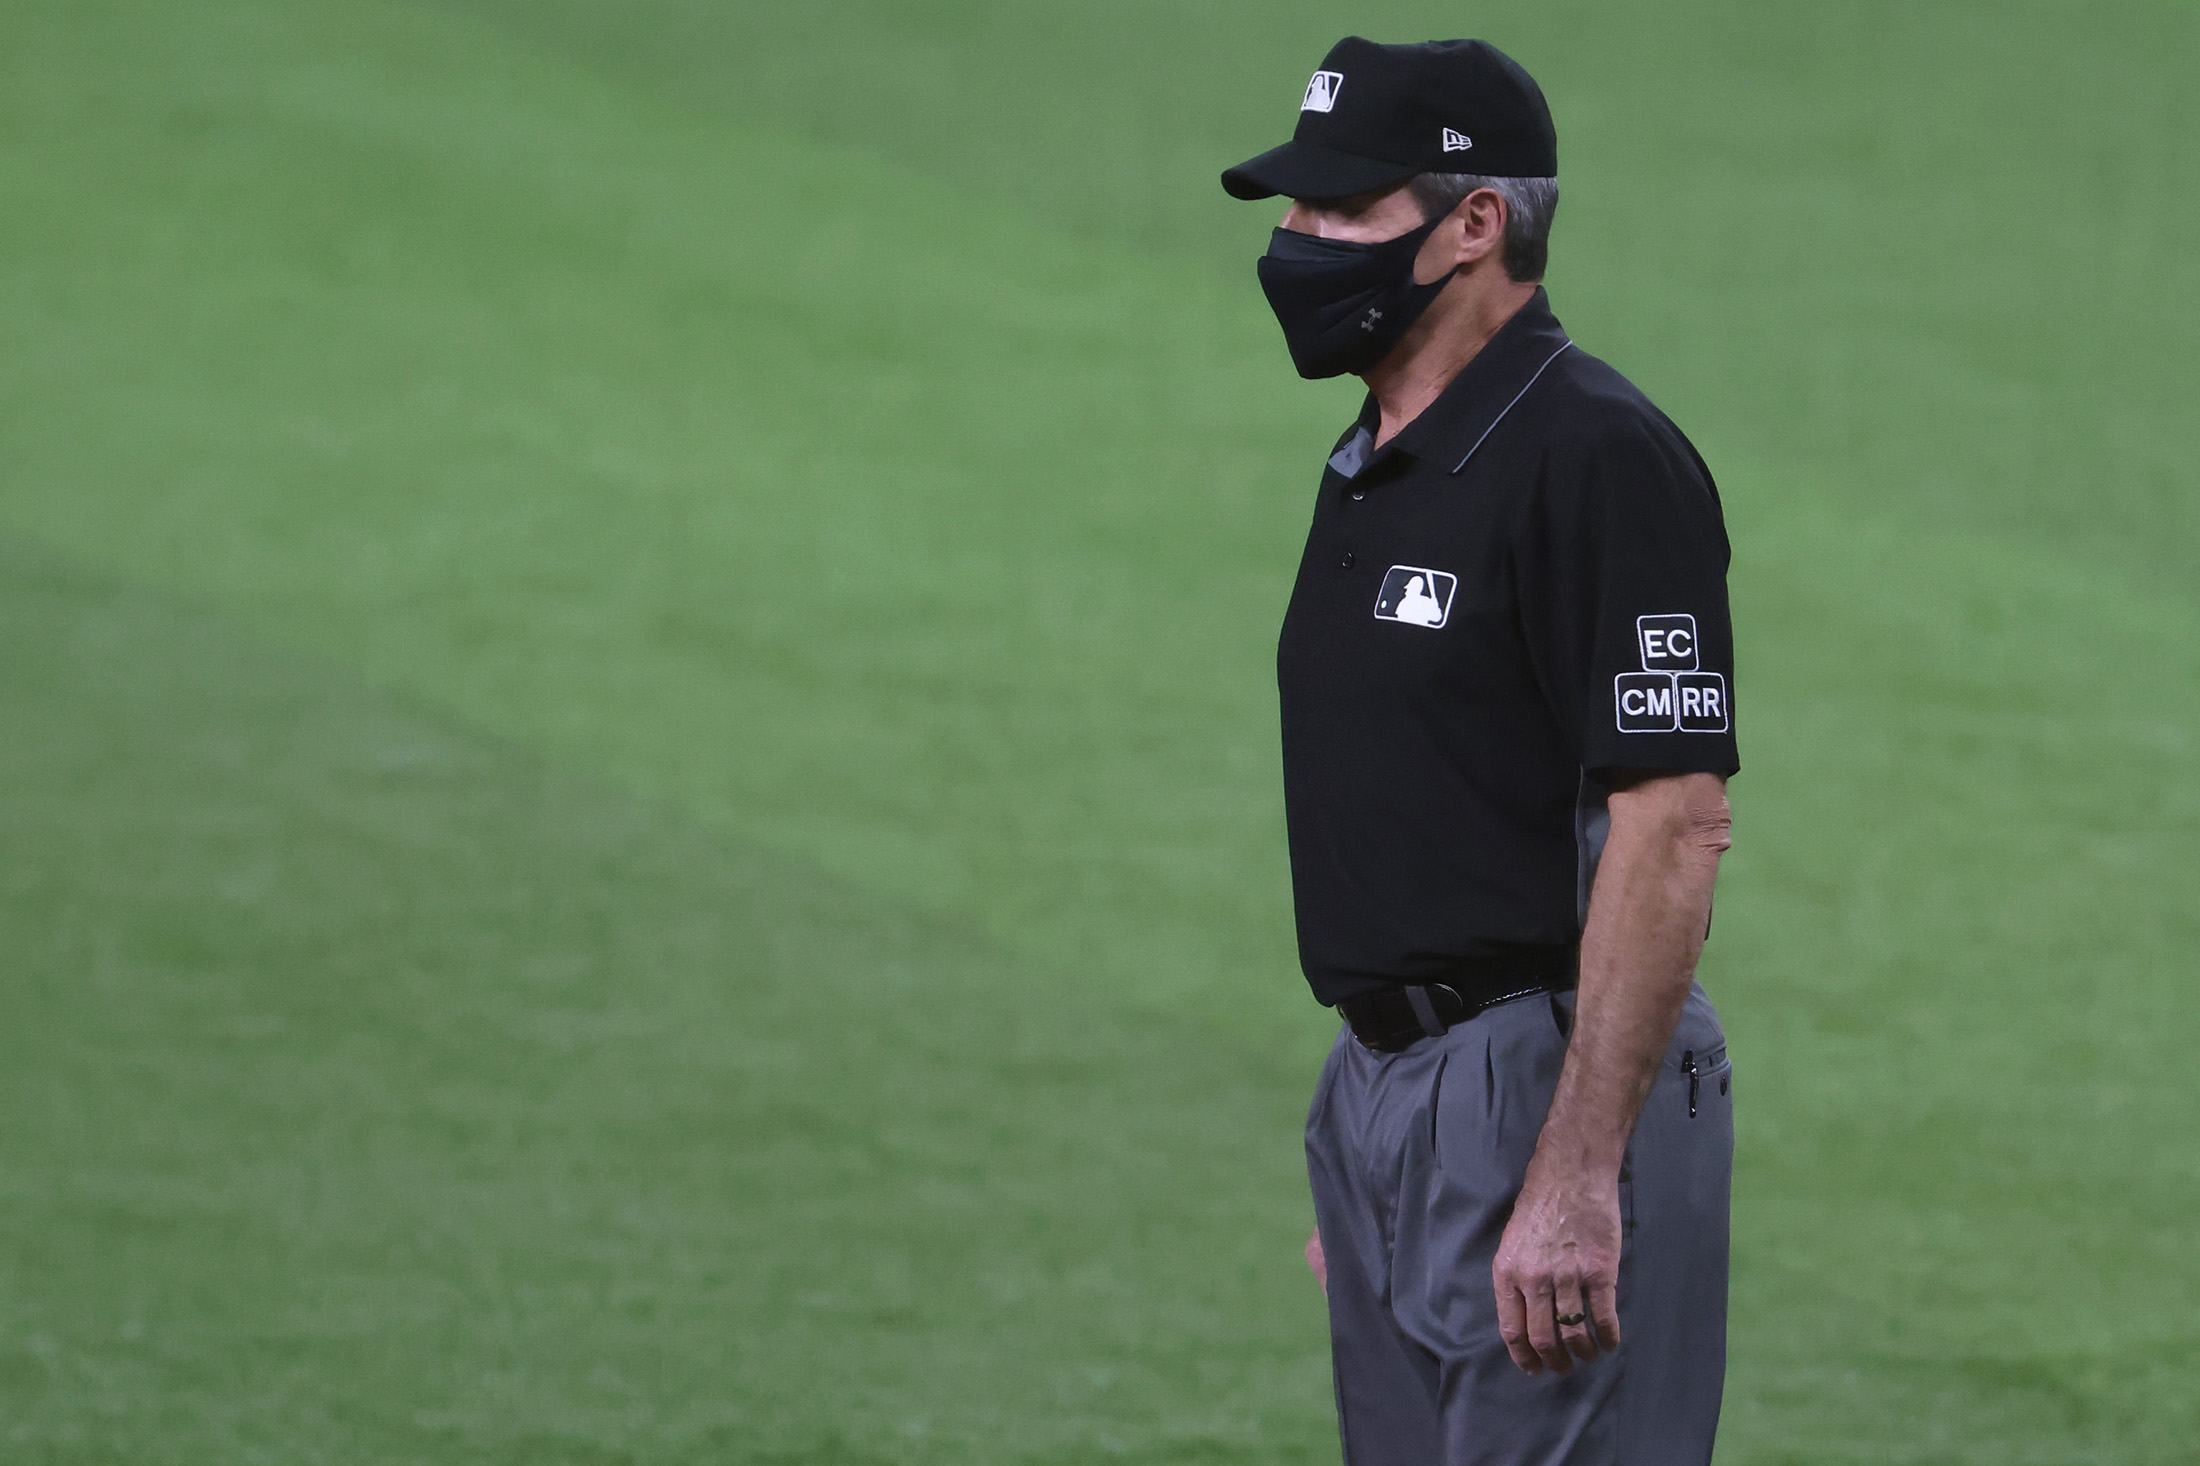 Umpire Who Clashed With Joe Torre Loses Baseball Bias Case - Bloomberg